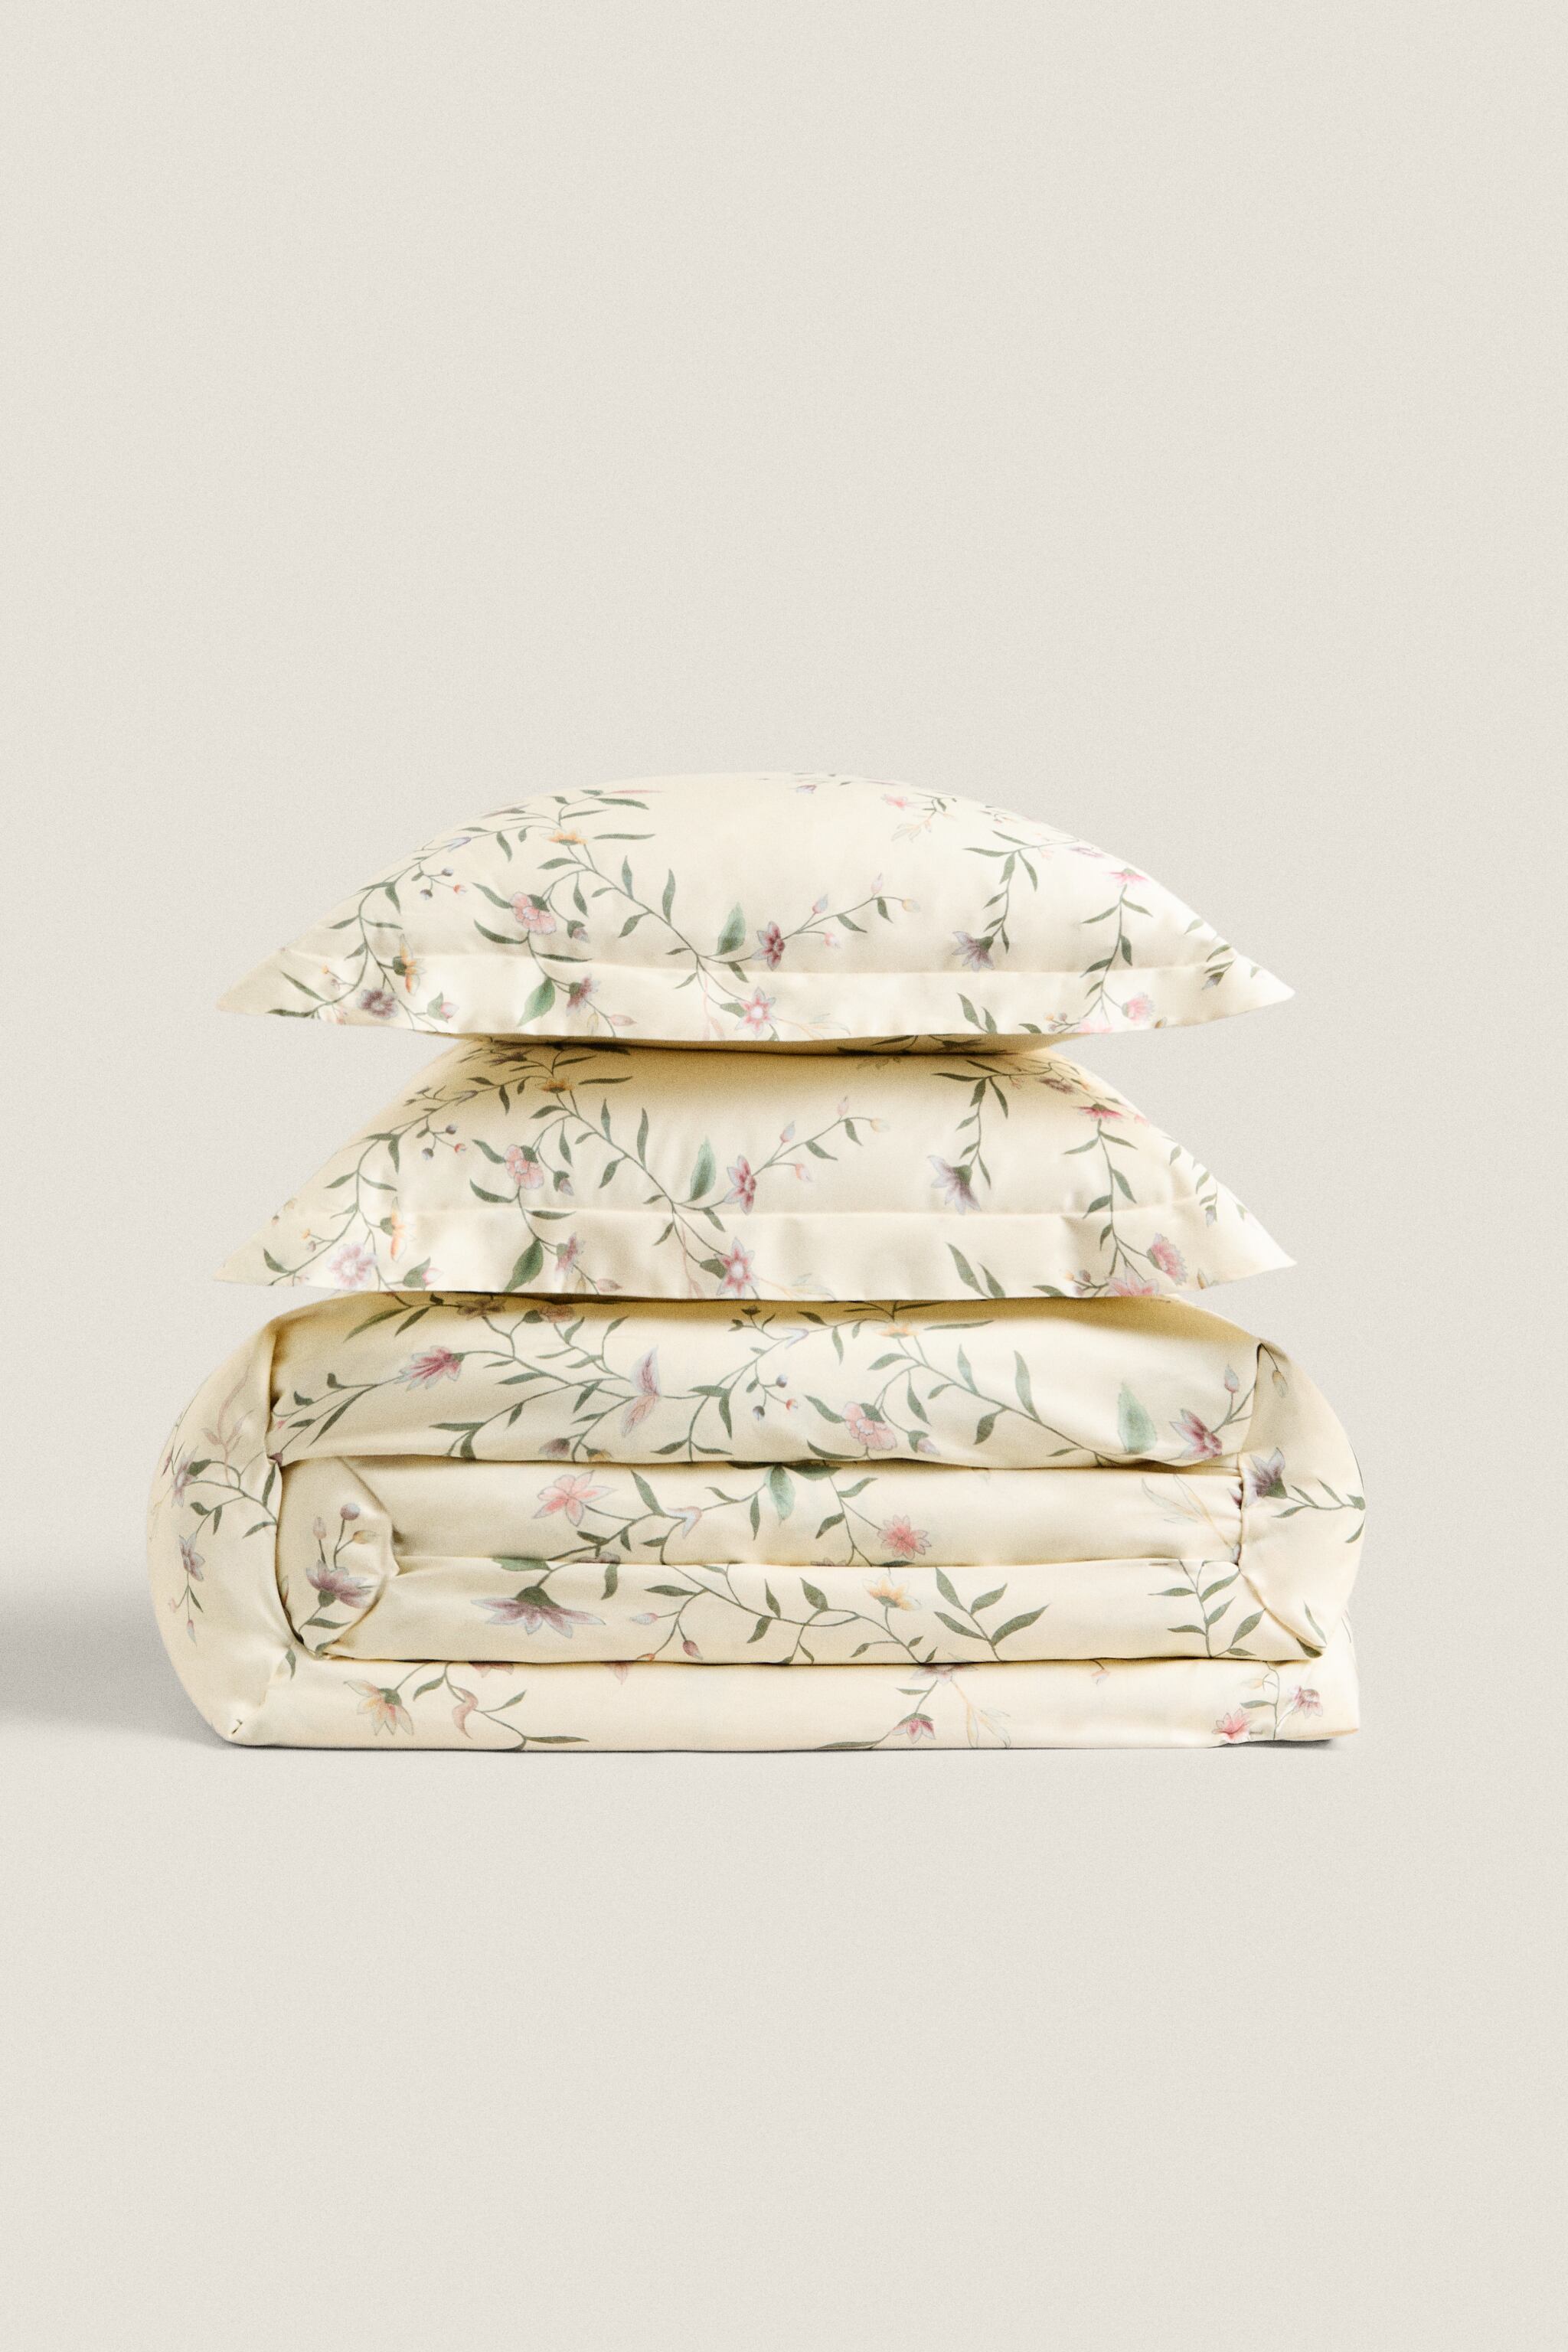 300 thread count) SATEEN FLORAL DUVET COVER